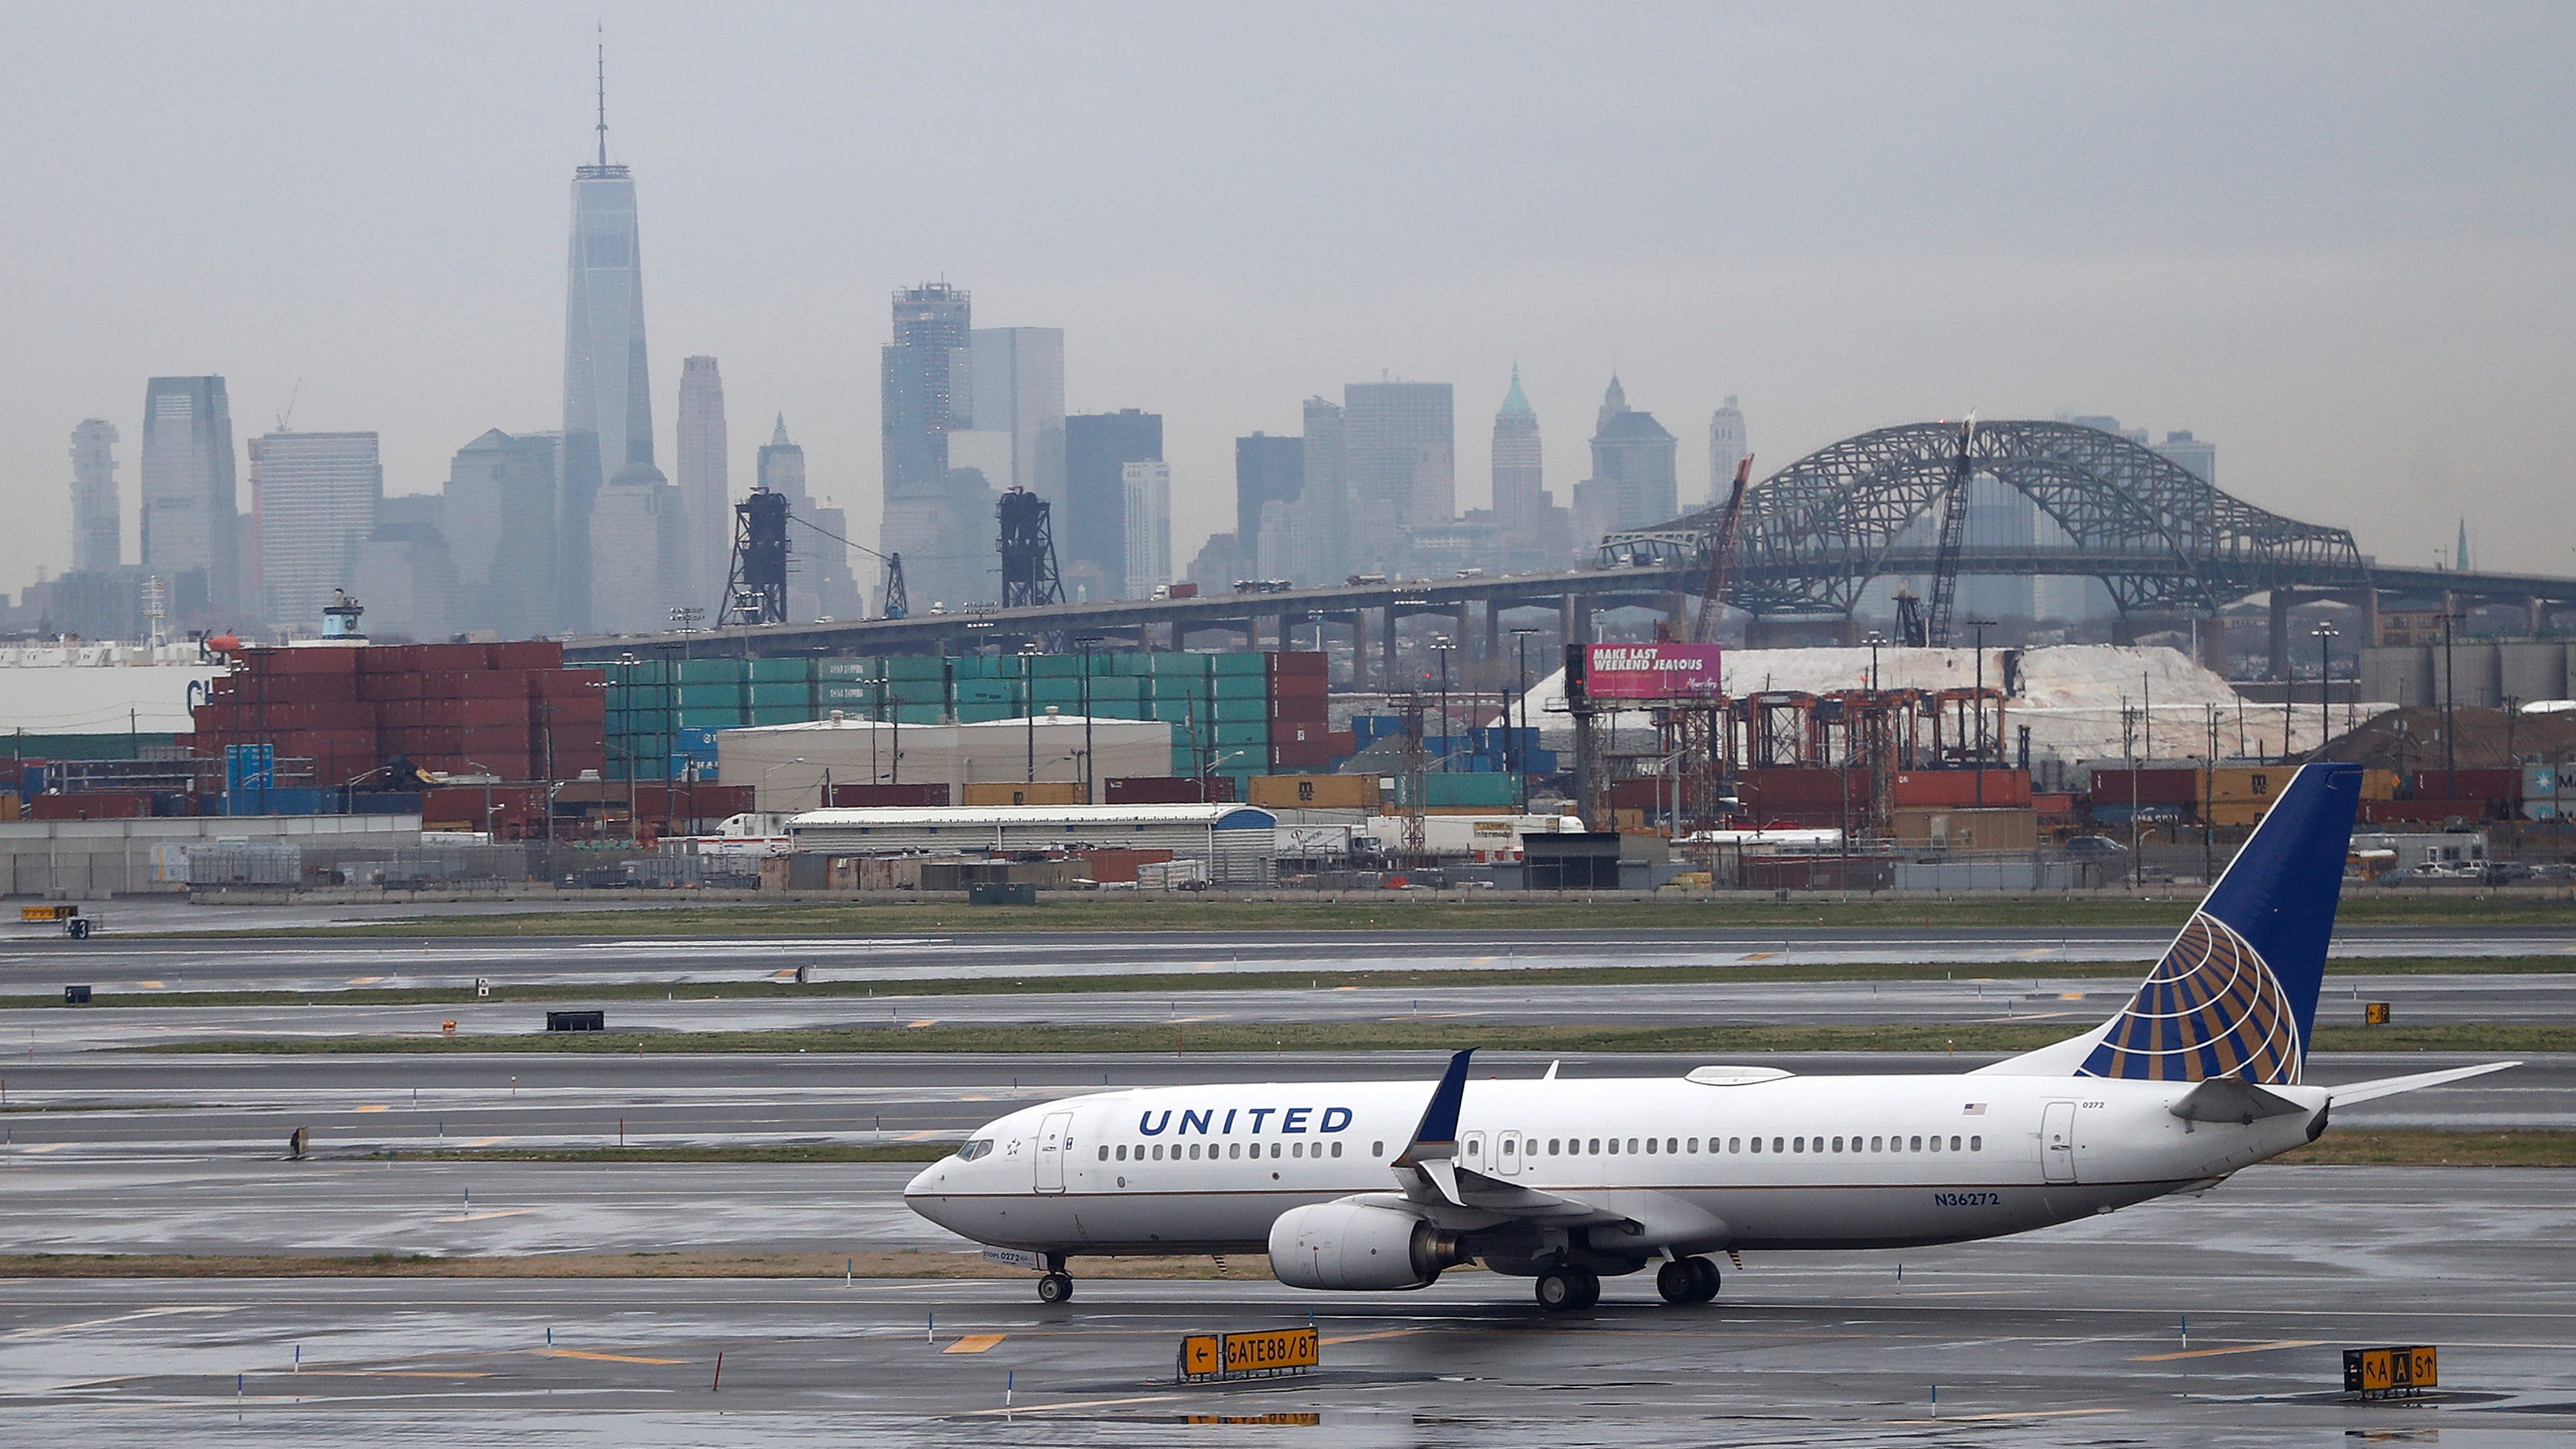 Newark Airport flight delays, cancellations among worst as July Fourth travel opens